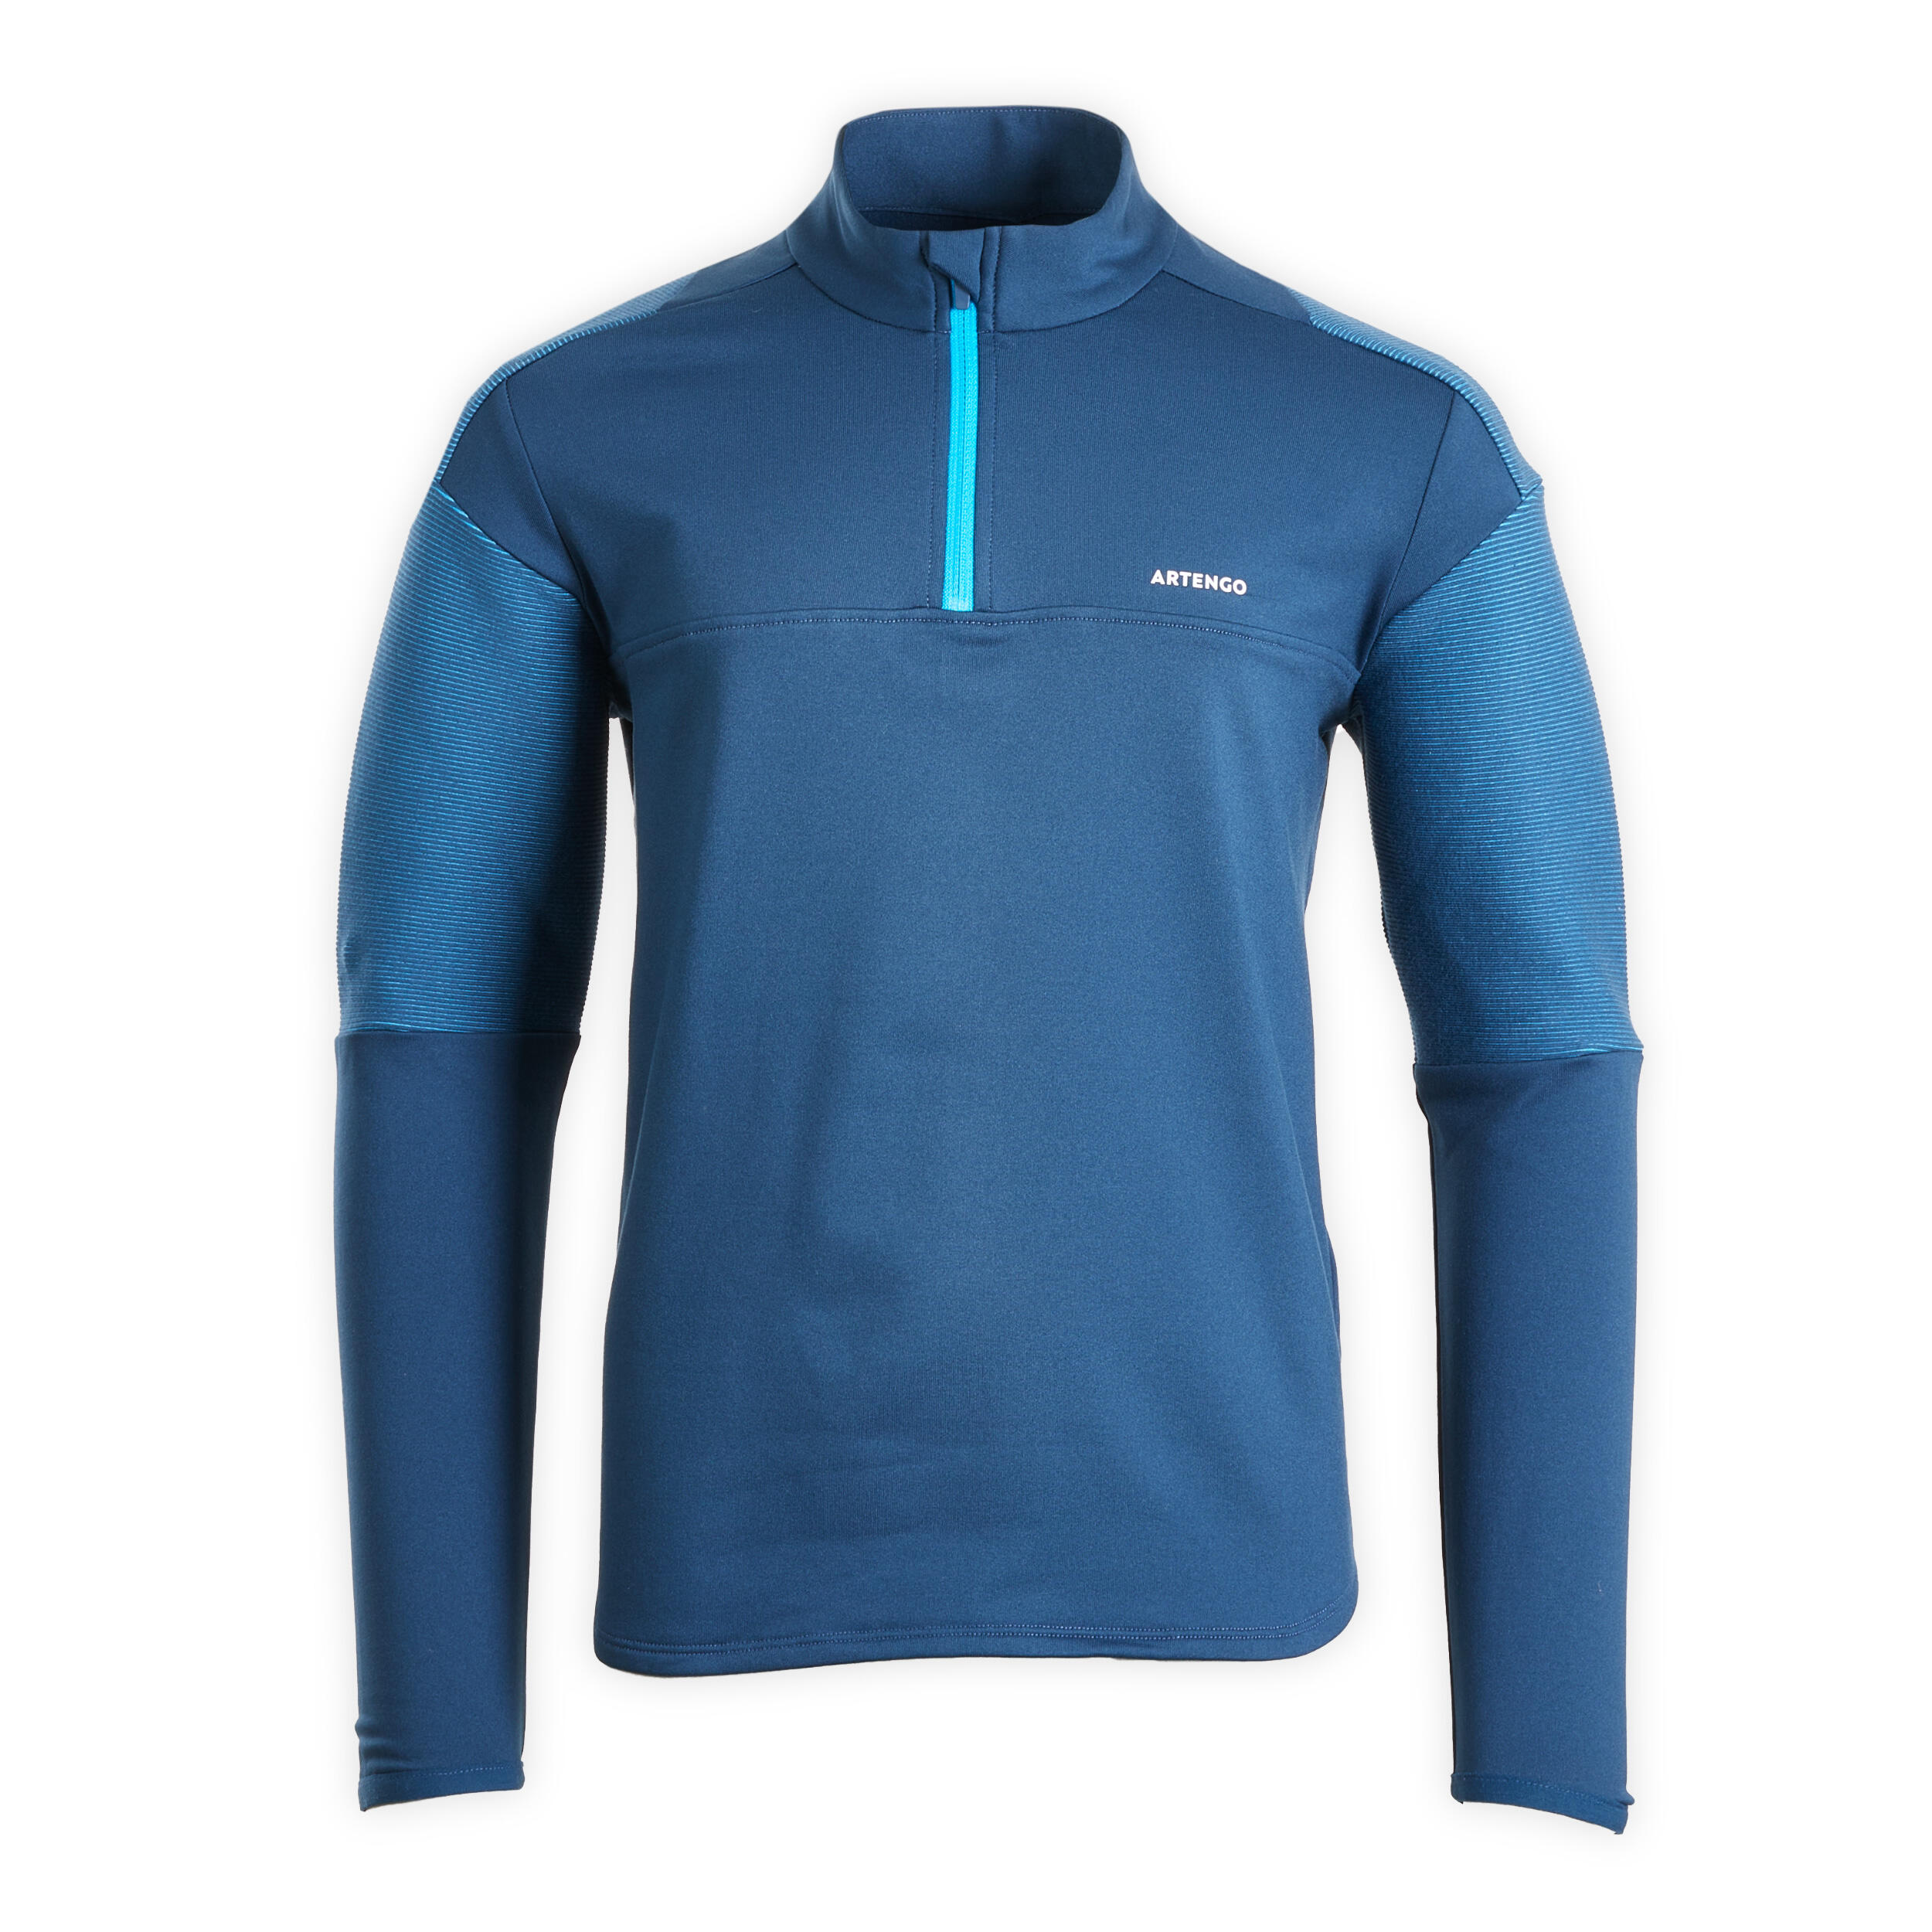 Boys' Long-Sleeved 1/2 Zip Thermal Tennis T-Shirt - Turquoise 7/7